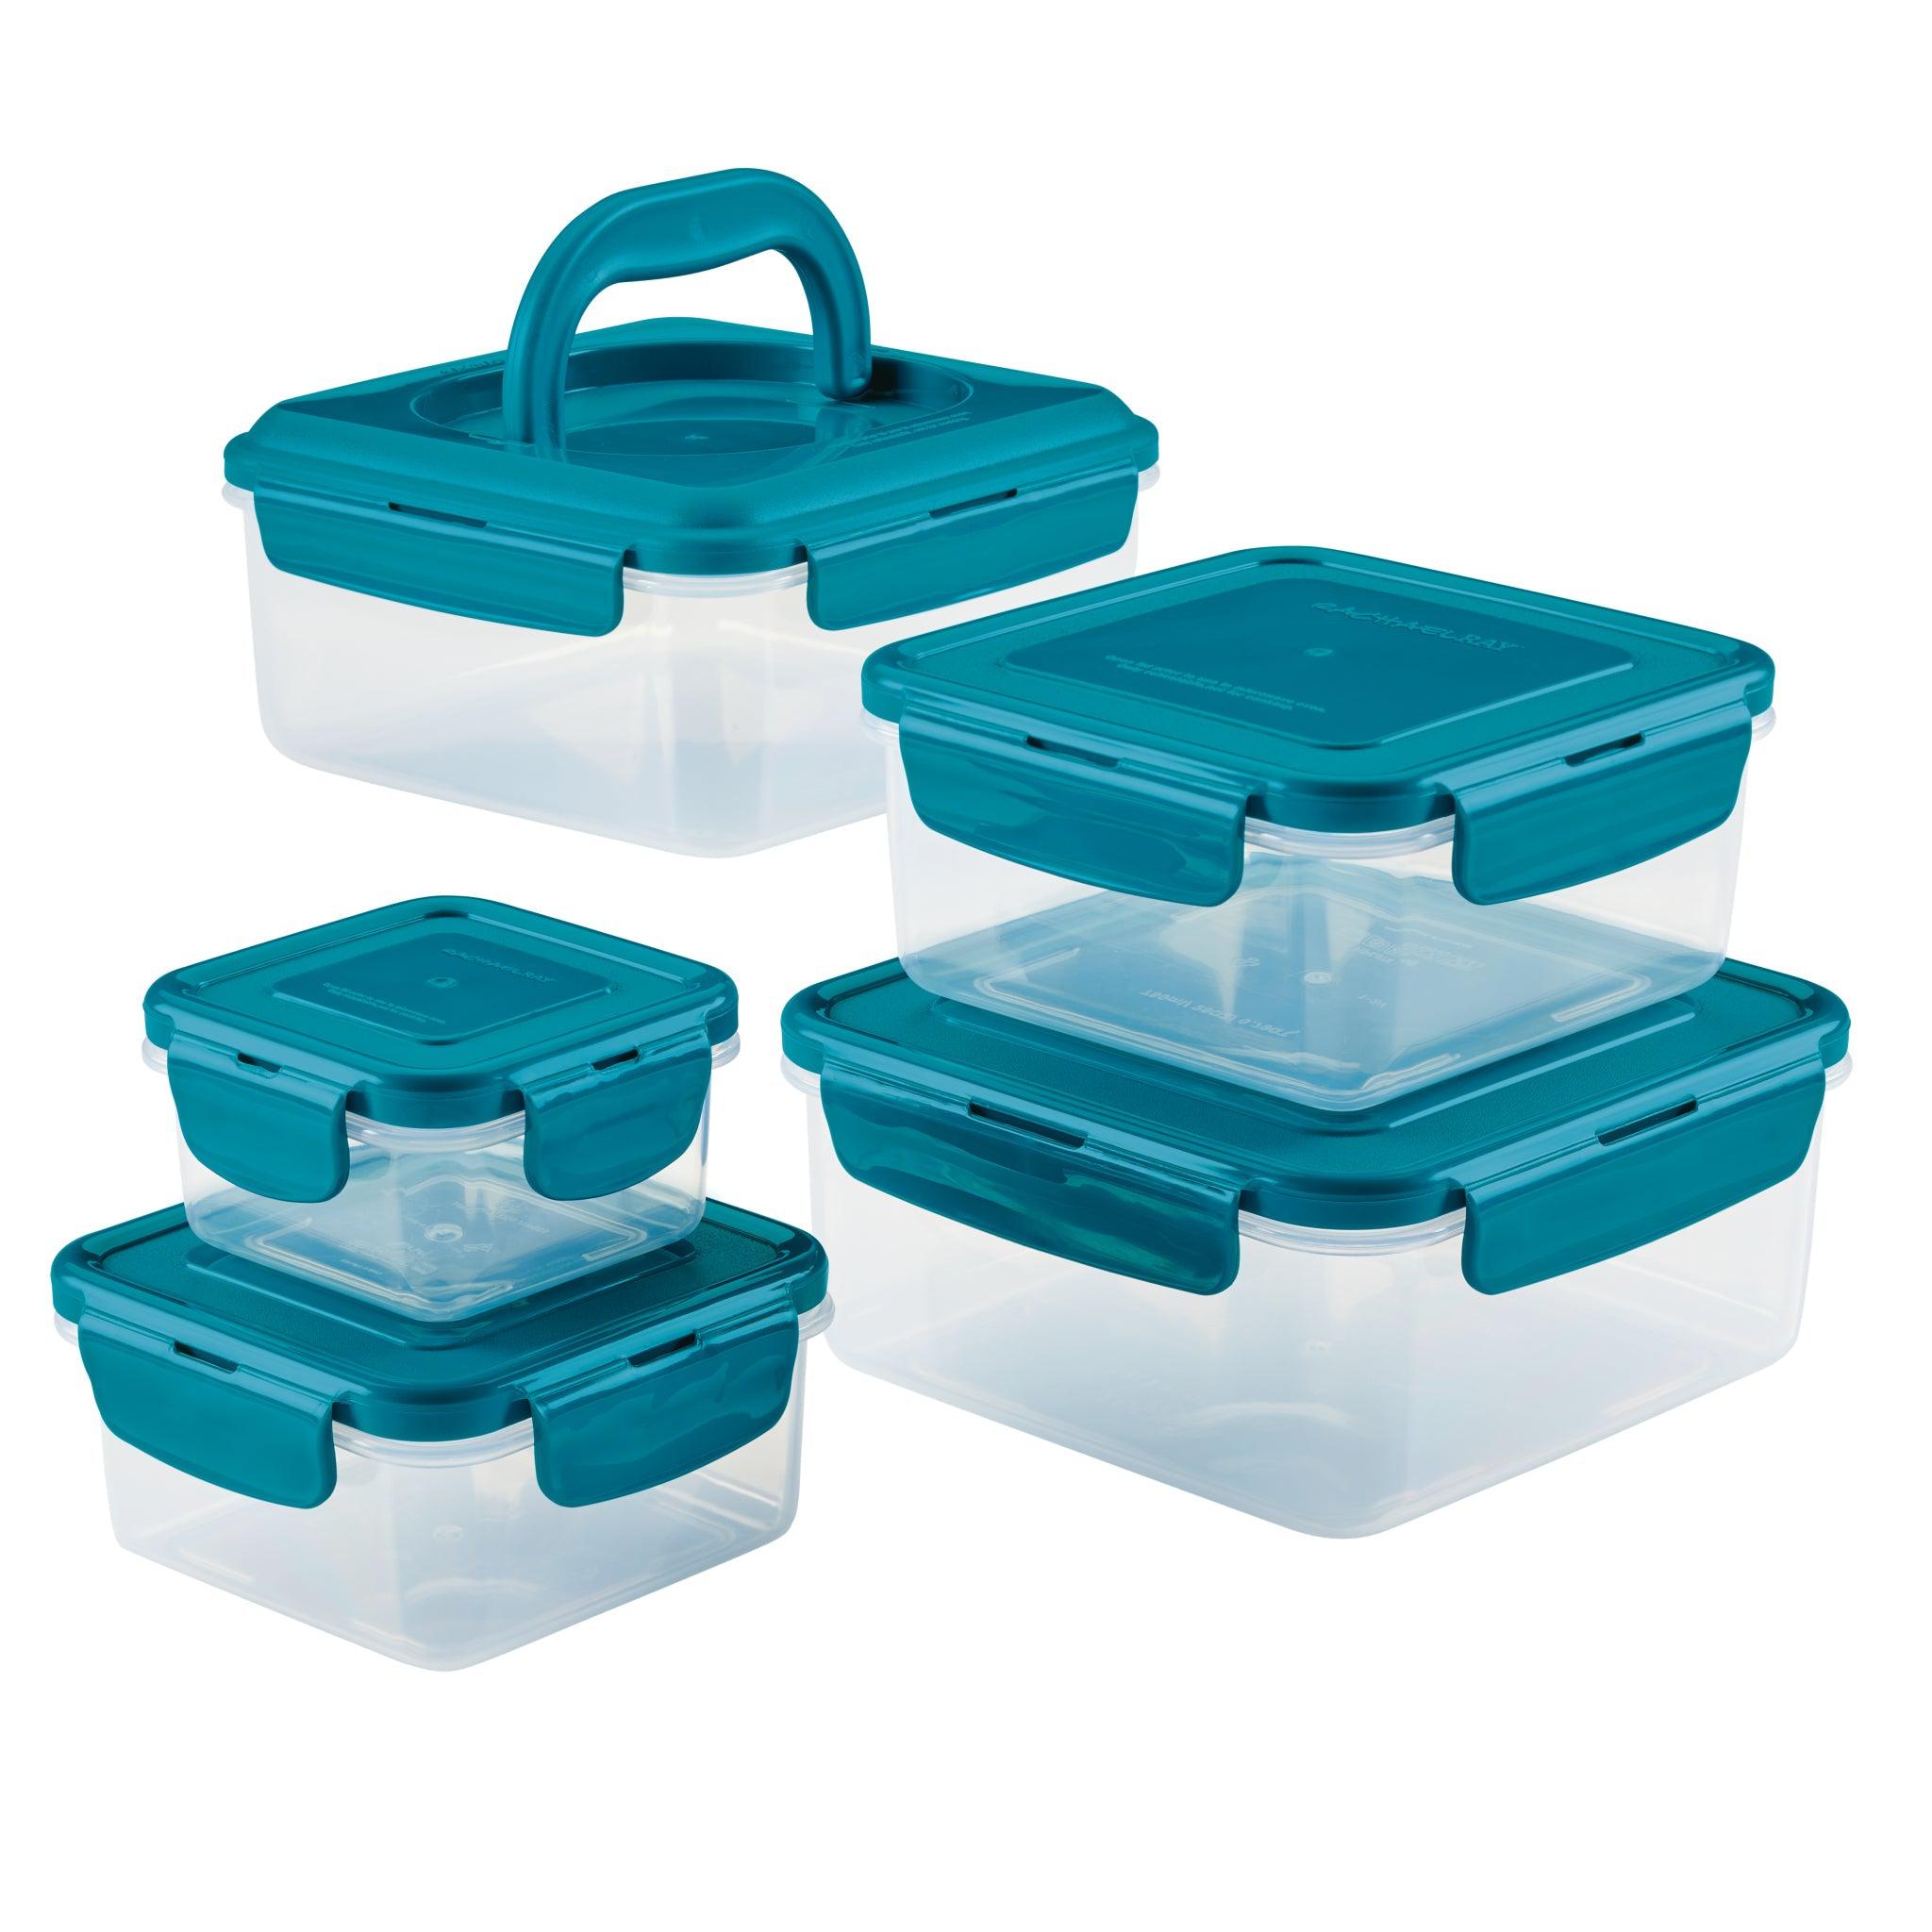 10-Piece Square Nestable Food Storage Containers